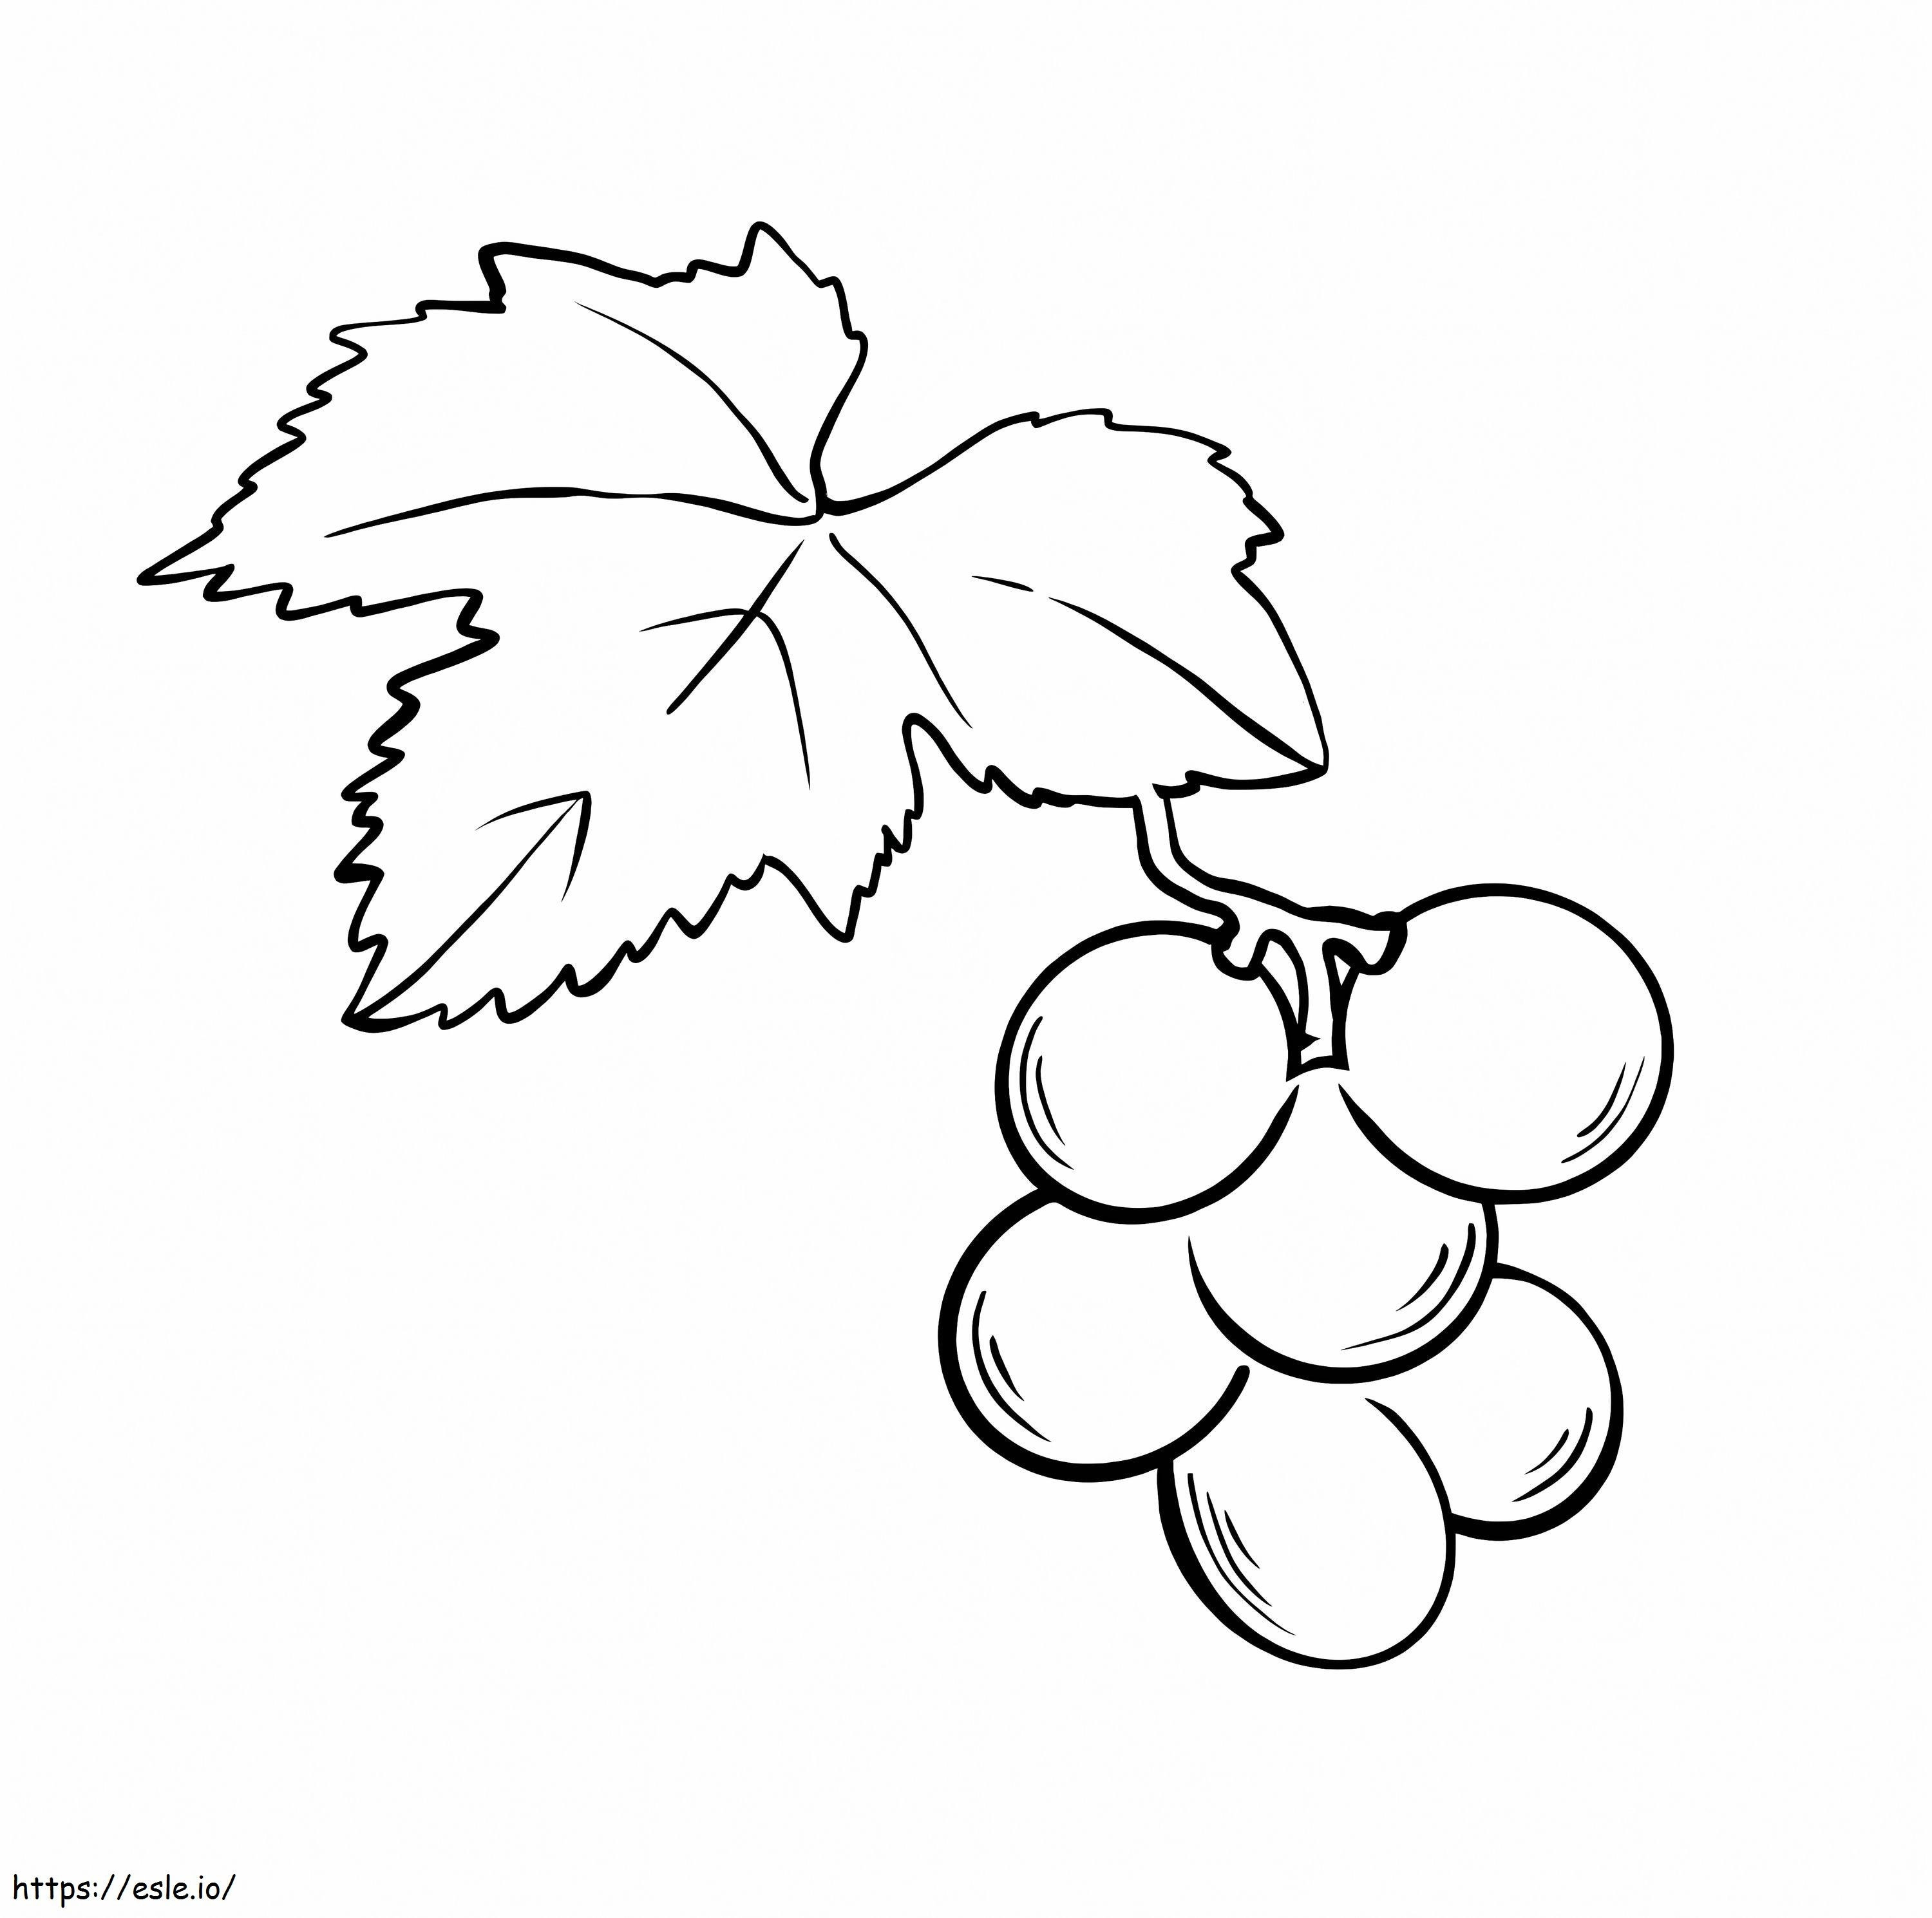 Grapes With Leaf coloring page